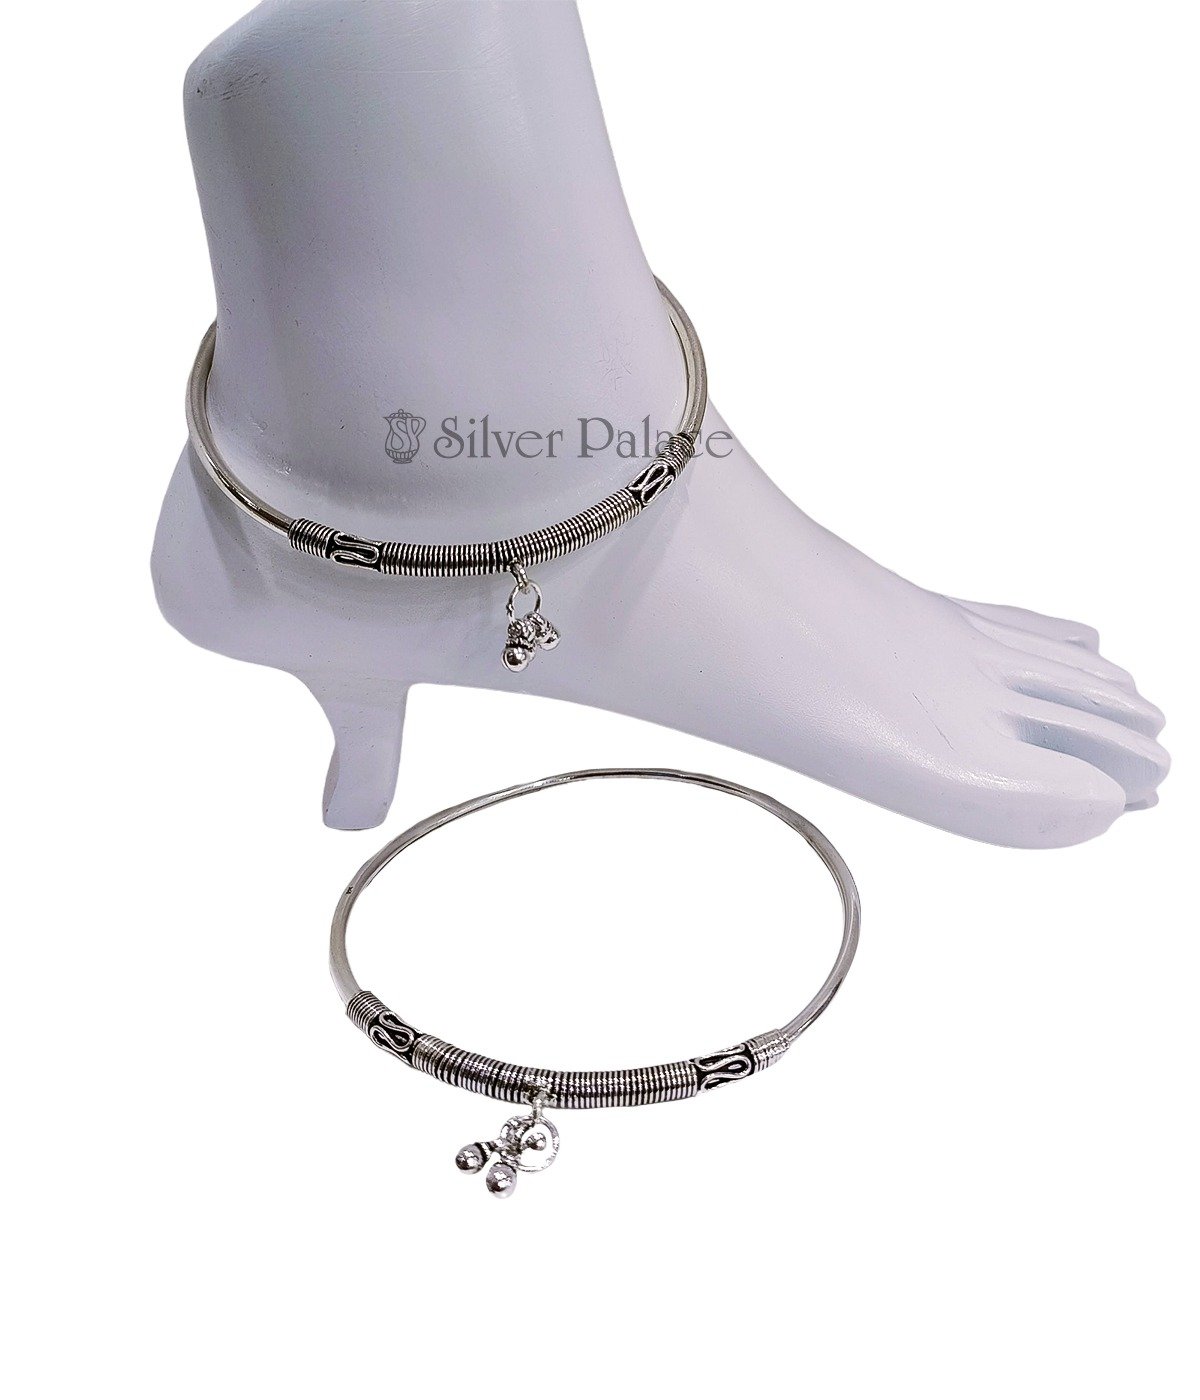 92.5 OXIDISED SILVER BANGLE TYPE TRADITIONAL ANKLET